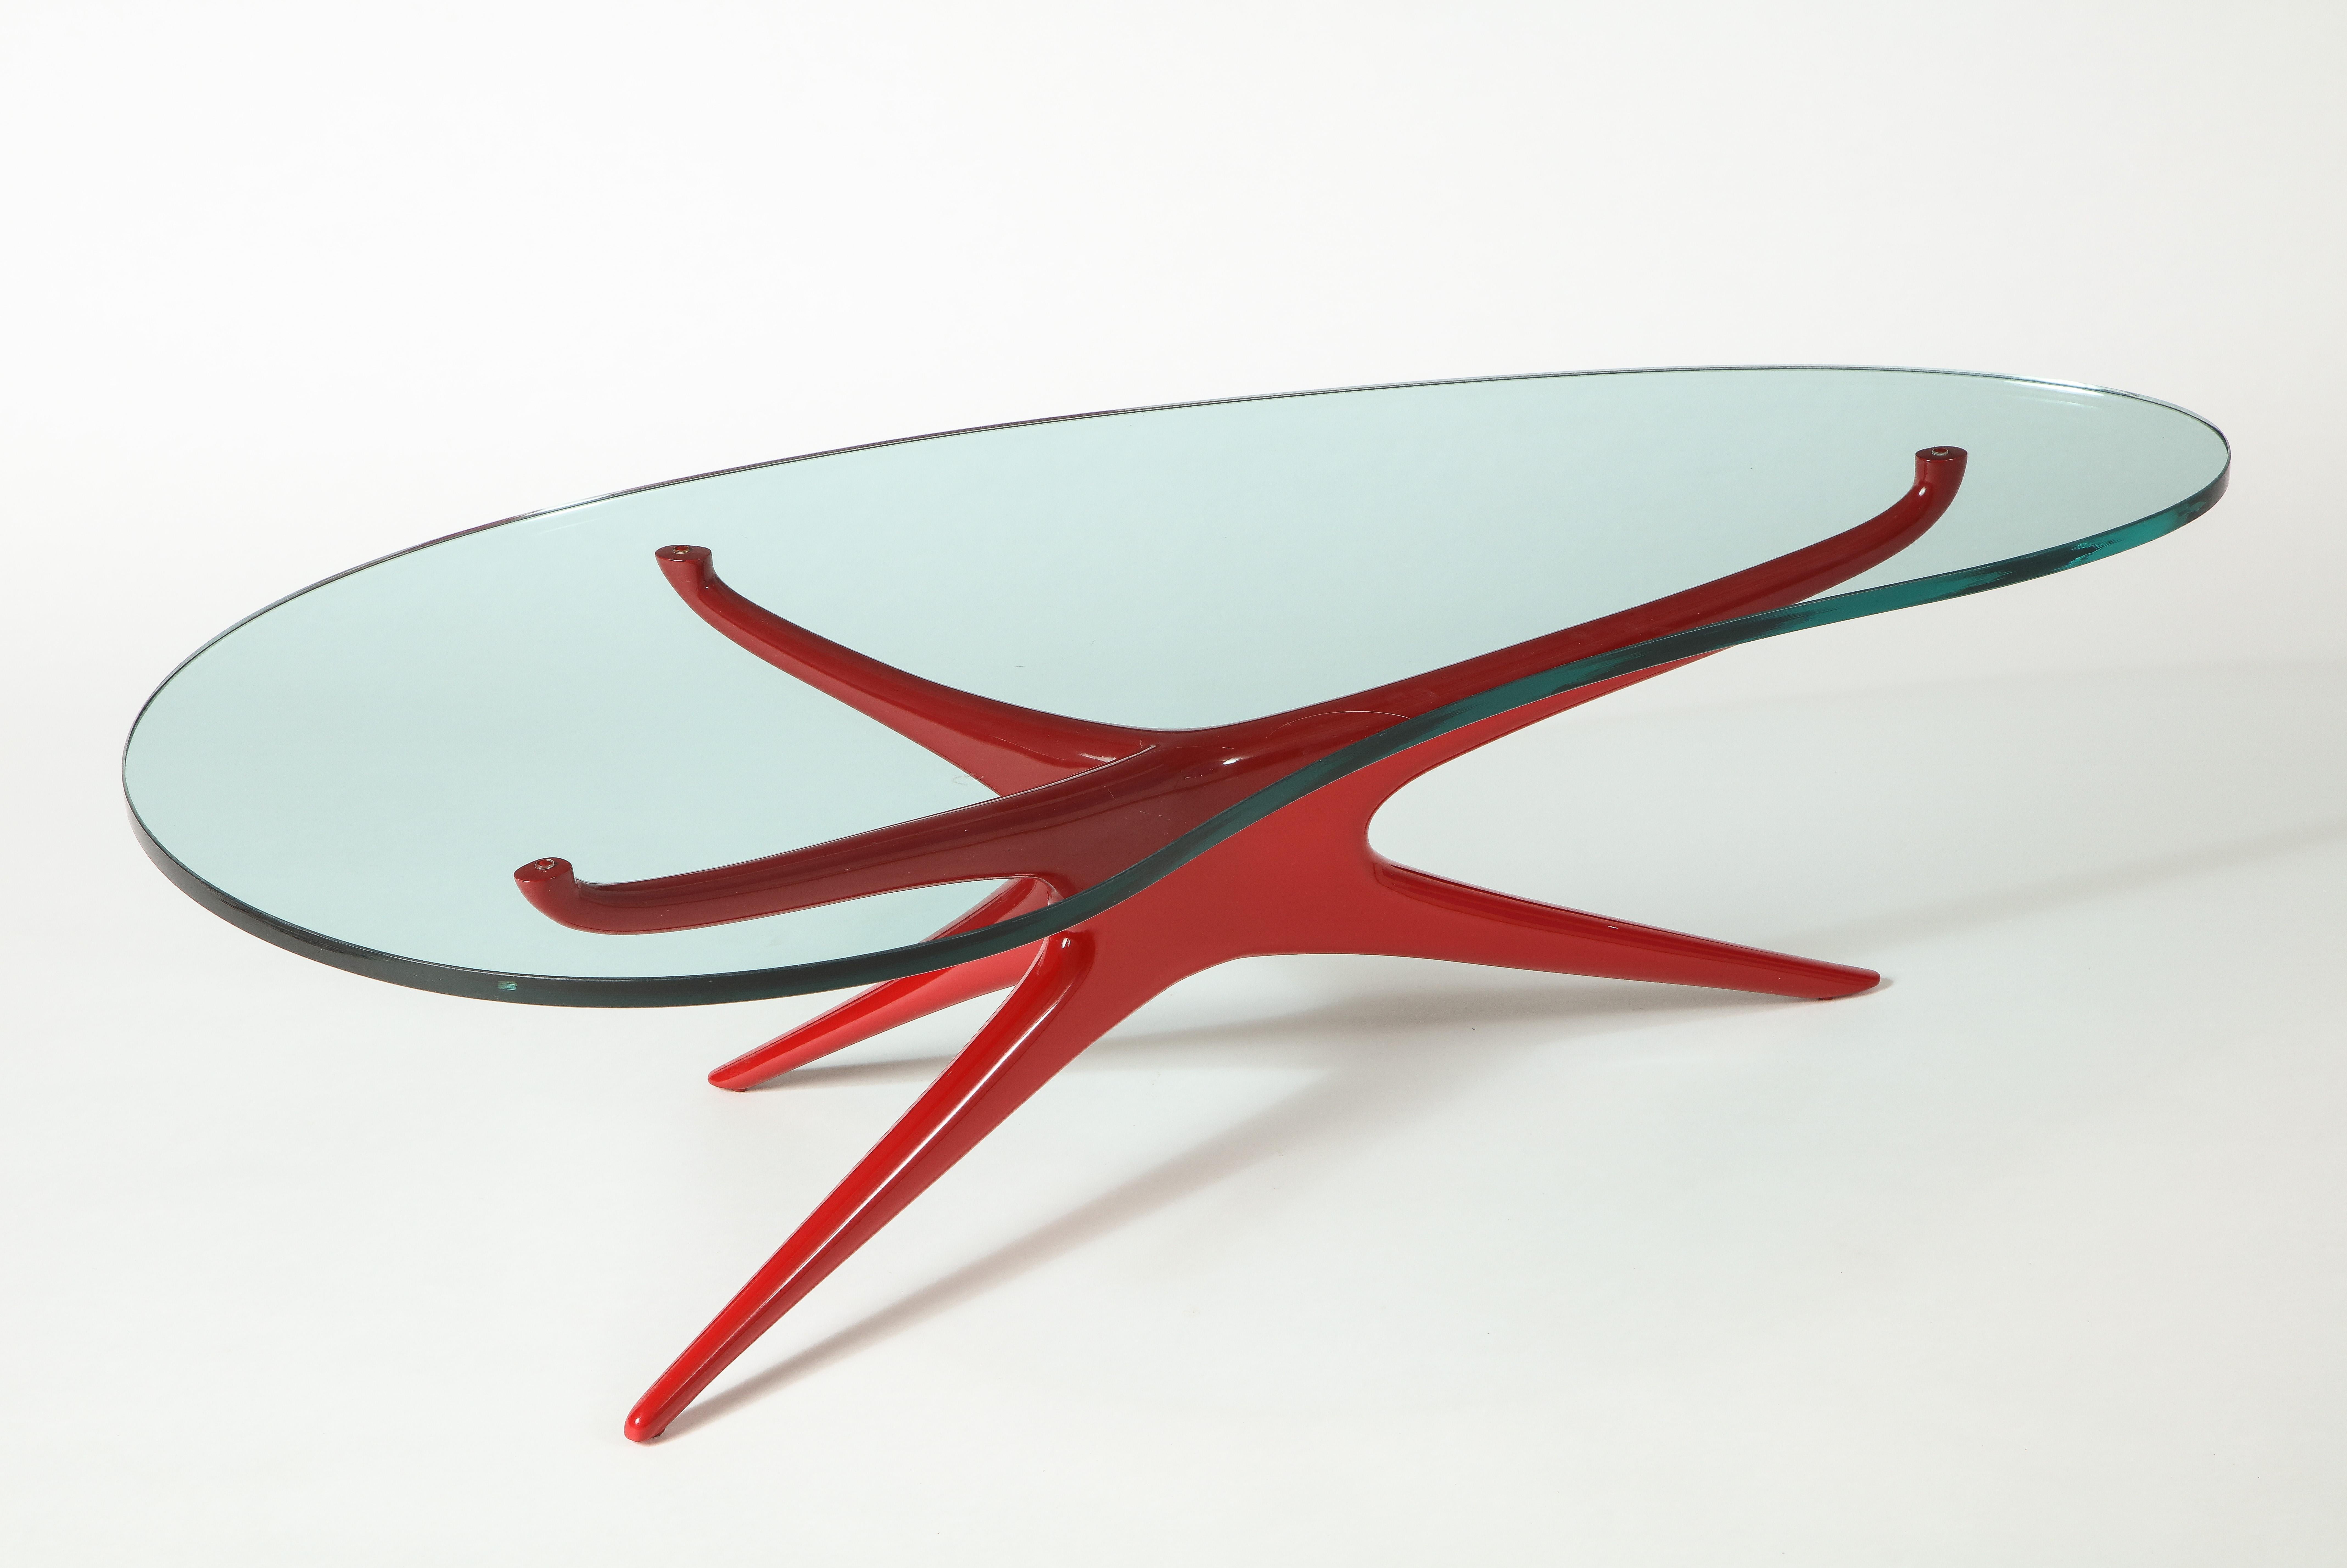 Recognized early on as an icon among Vladimir’s repertoire, the 412 Sculpted Coffee Table has become a hallmark of midcentury modern design. Sinuous sculpted base draws the eye sharply upward into a dynamic joint that grows organically out to